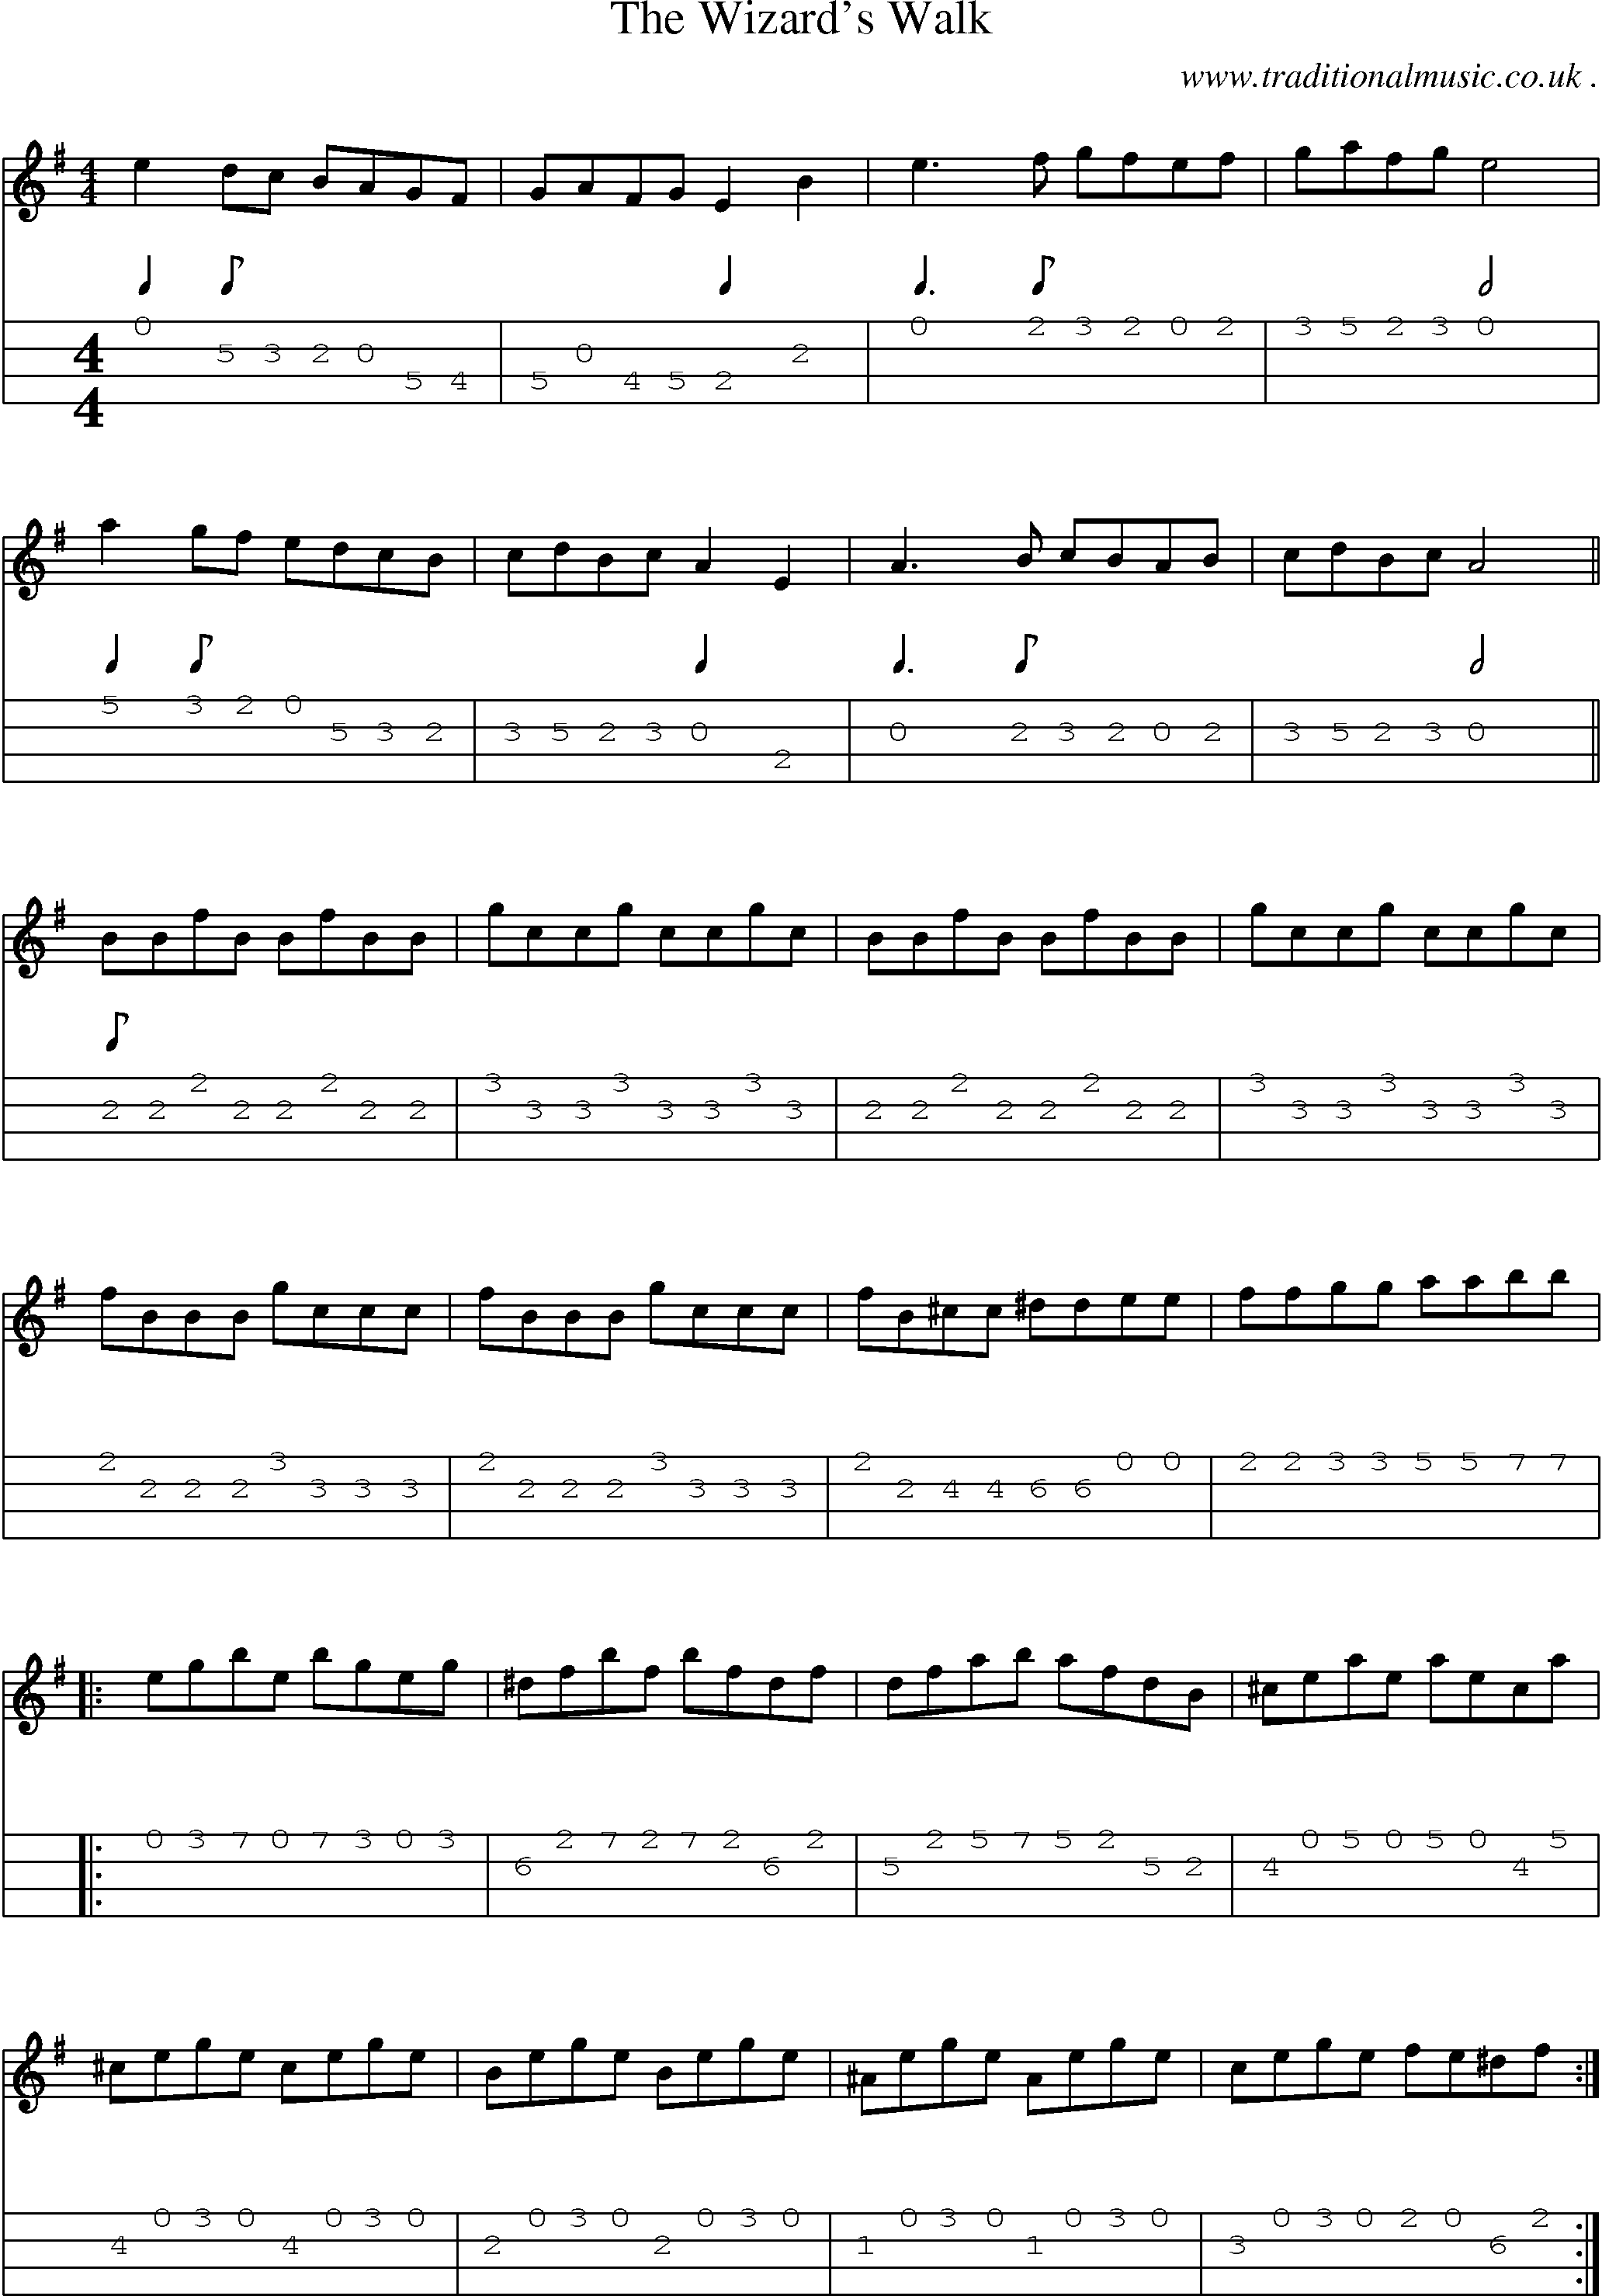 Sheet-Music and Mandolin Tabs for The Wizards Walk